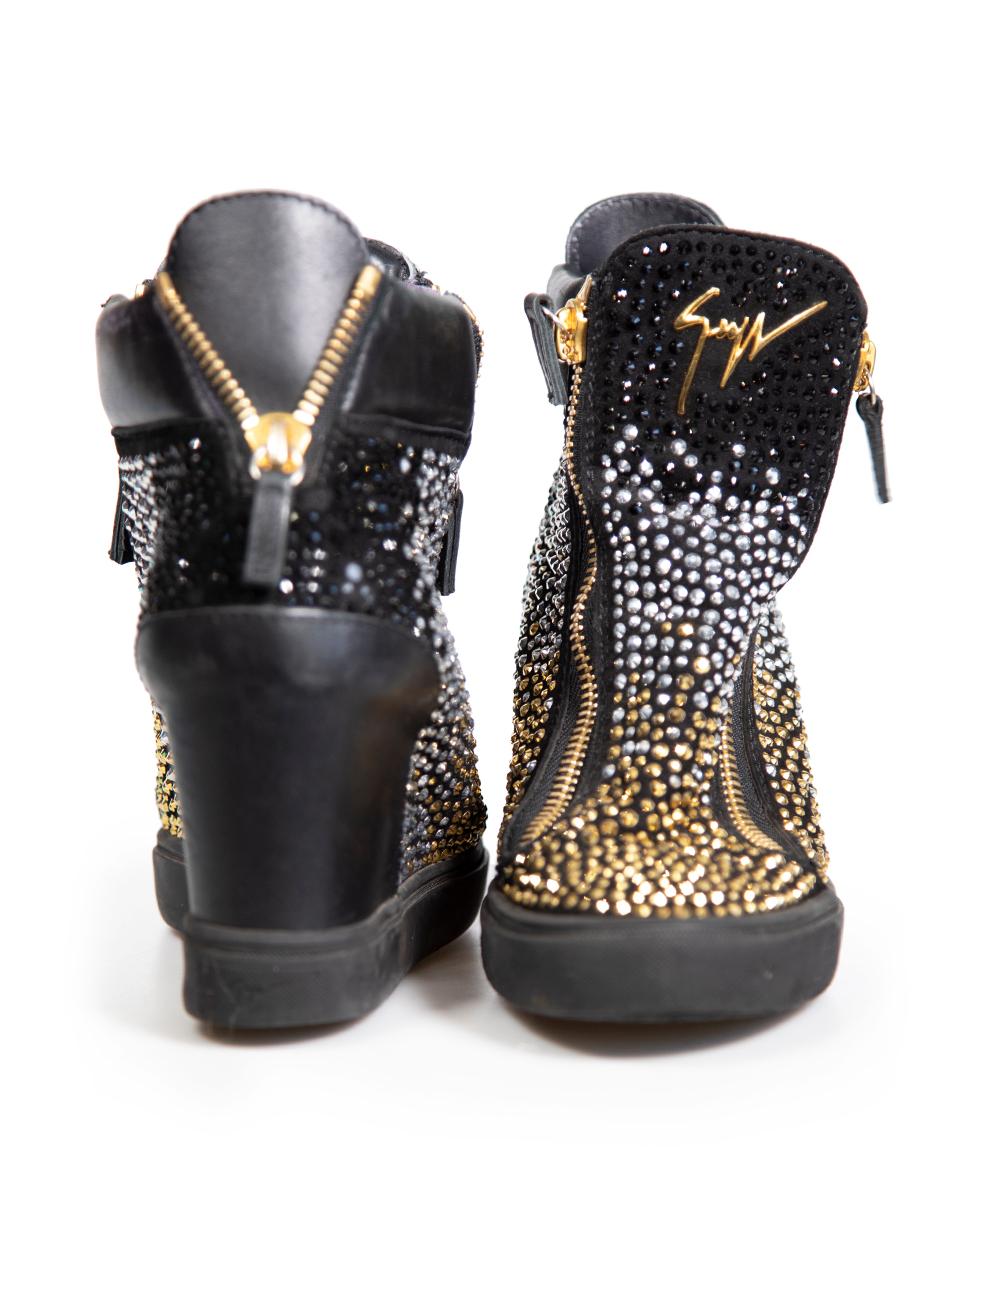 Giuseppe Zanotti Black Rhinestone Wedge Trainers Size IT 39 In Good Condition For Sale In London, GB